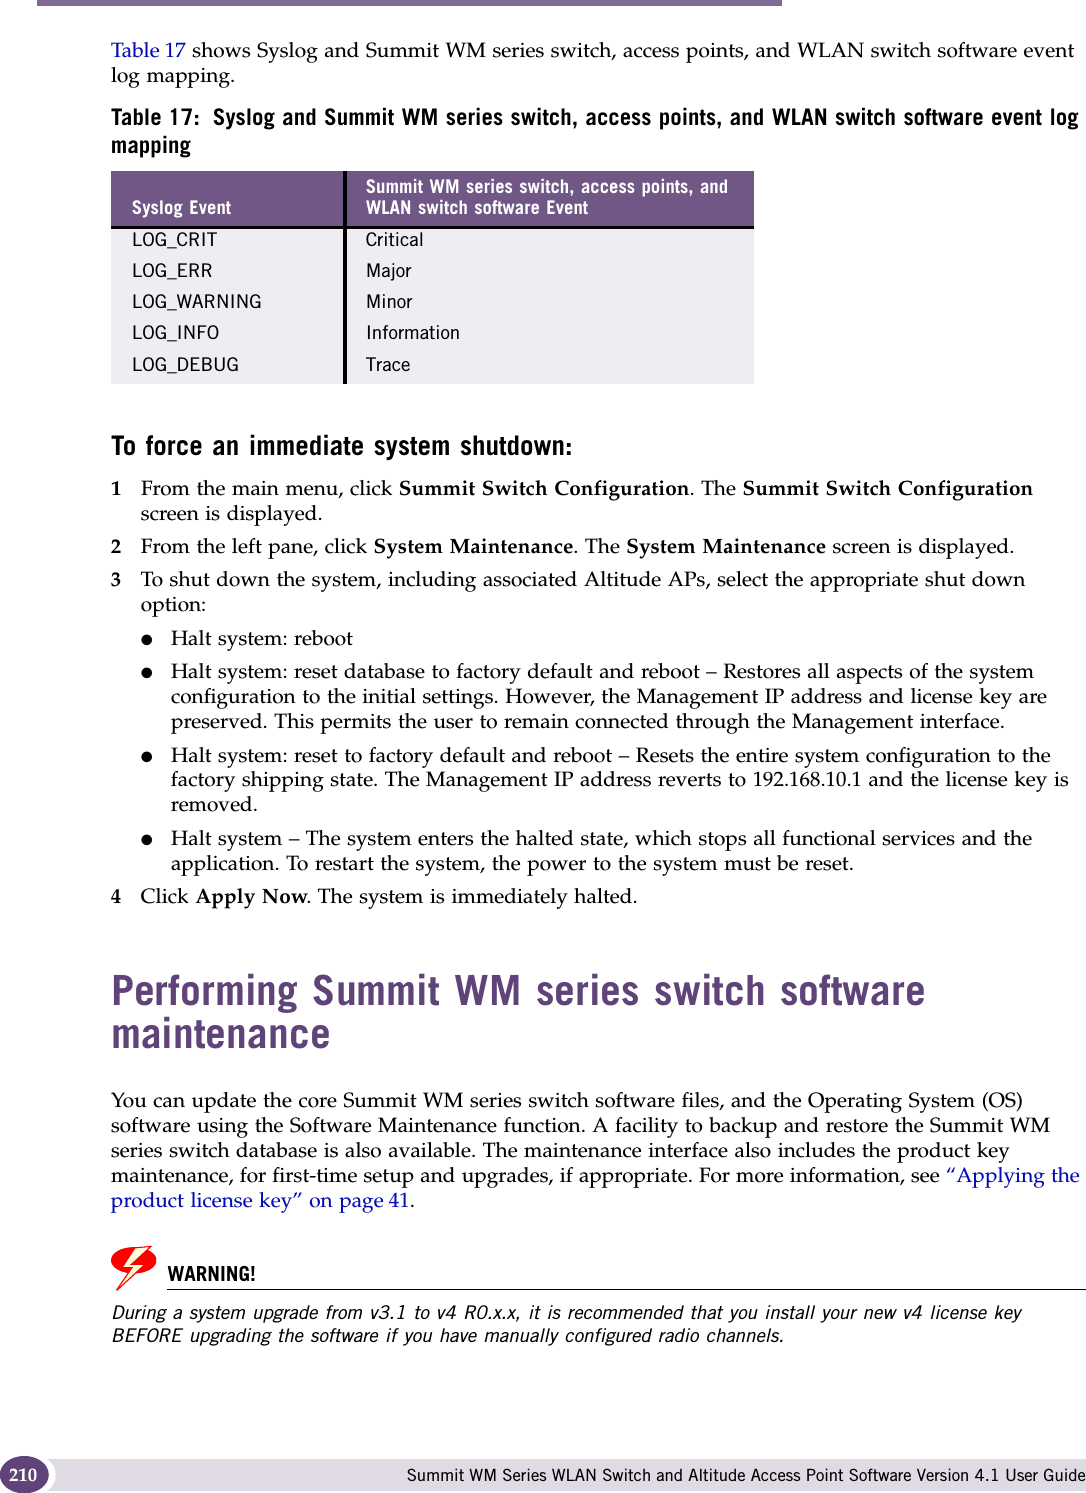 Performing system maintenance Summit WM Series WLAN Switch and Altitude Access Point Software Version 4.1 User Guide210Table 17 shows Syslog and Summit WM series switch, access points, and WLAN switch software event log mapping.To force an immediate system shutdown:1From the main menu, click Summit Switch Configuration. The Summit Switch Configuration screen is displayed.2From the left pane, click System Maintenance. The System Maintenance screen is displayed.3To shut down the system, including associated Altitude APs, select the appropriate shut down option:●Halt system: reboot●Halt system: reset database to factory default and reboot – Restores all aspects of the system configuration to the initial settings. However, the Management IP address and license key are preserved. This permits the user to remain connected through the Management interface.●Halt system: reset to factory default and reboot – Resets the entire system configuration to the factory shipping state. The Management IP address reverts to 192.168.10.1 and the license key is removed.●Halt system – The system enters the halted state, which stops all functional services and the application. To restart the system, the power to the system must be reset.4Click Apply Now. The system is immediately halted.Performing Summit WM series switch software maintenanceYou can update the core Summit WM series switch software files, and the Operating System (OS) software using the Software Maintenance function. A facility to backup and restore the Summit WM series switch database is also available. The maintenance interface also includes the product key maintenance, for first-time setup and upgrades, if appropriate. For more information, see “Applying the product license key” on page 41. WARNING!During a system upgrade from v3.1 to v4 R0.x.x, it is recommended that you install your new v4 license key BEFORE upgrading the software if you have manually configured radio channels. Table 17: Syslog and Summit WM series switch, access points, and WLAN switch software event log mappingSyslog EventSummit WM series switch, access points, and WLAN switch software EventLOG_CRIT CriticalLOG_ERR MajorLOG_WARNING MinorLOG_INFO InformationLOG_DEBUG Trace